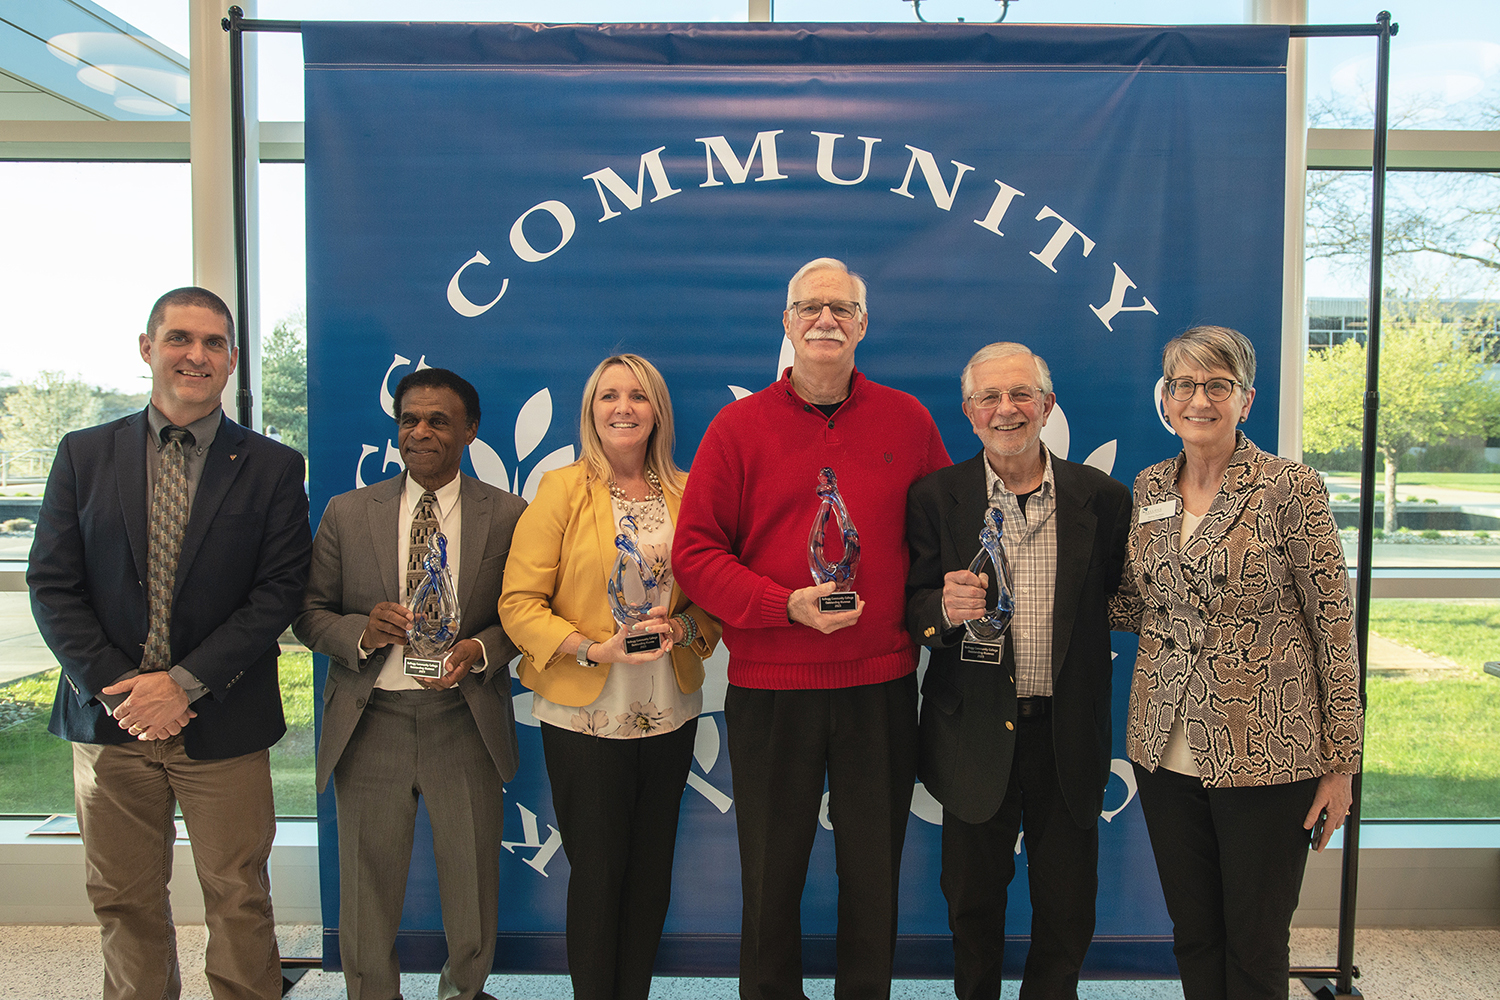 Pictured, from left to right, are KCC Vice President for Communications and Advancement Eric Greene, Bobby Holley, Teresa Allen, Tom Rose, Bernie Stankewicz and KCC Foundation Executive Director Teresa Durham.